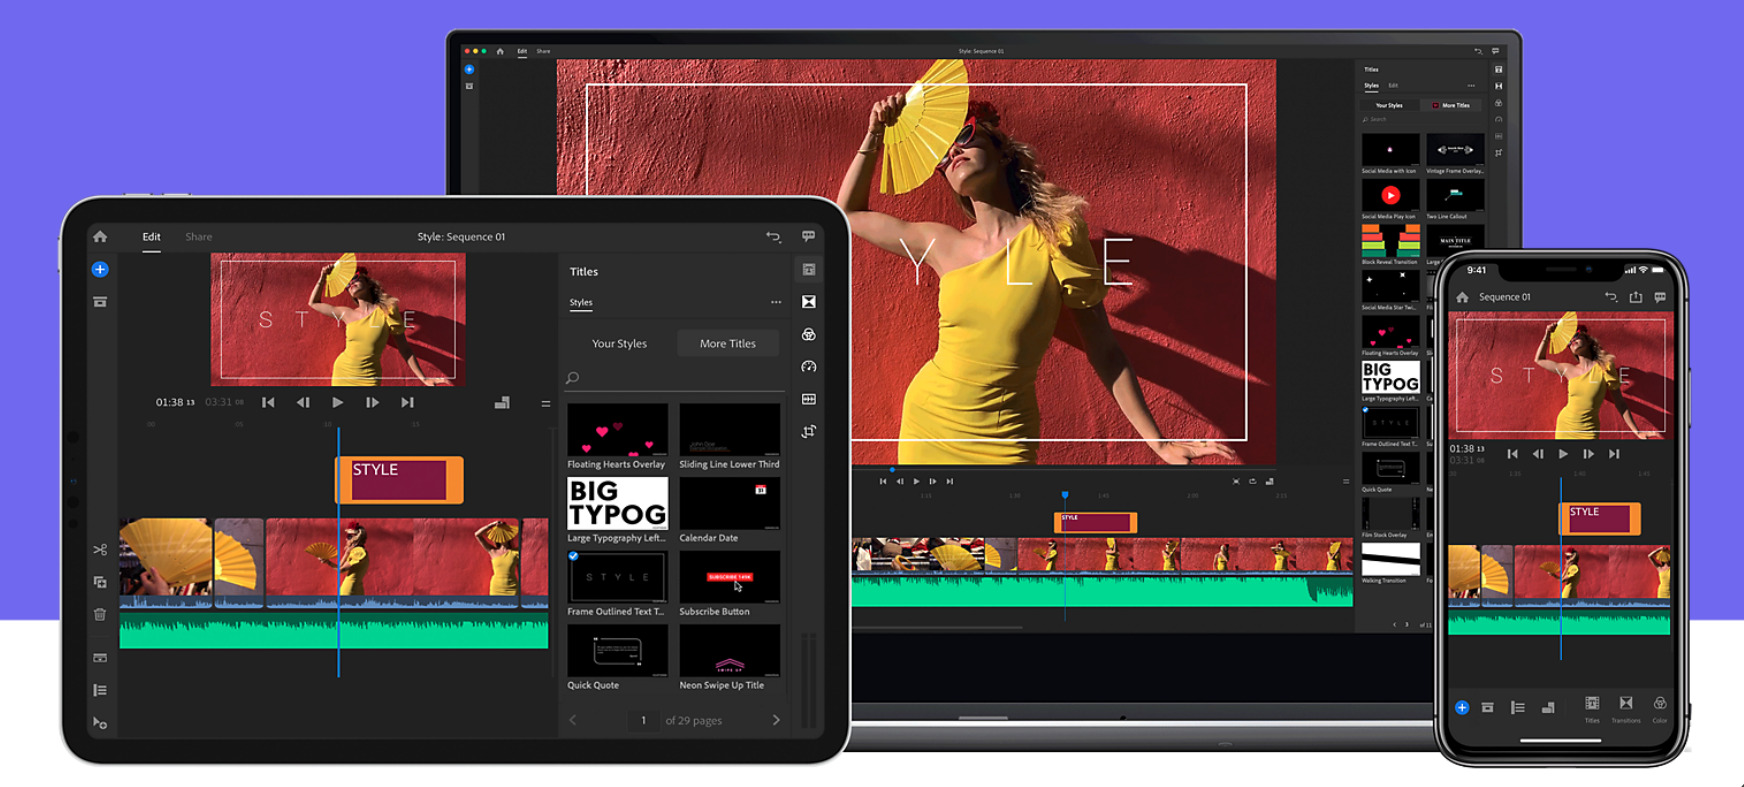 Adobe Premiere Rush is a powerful free video editing tool